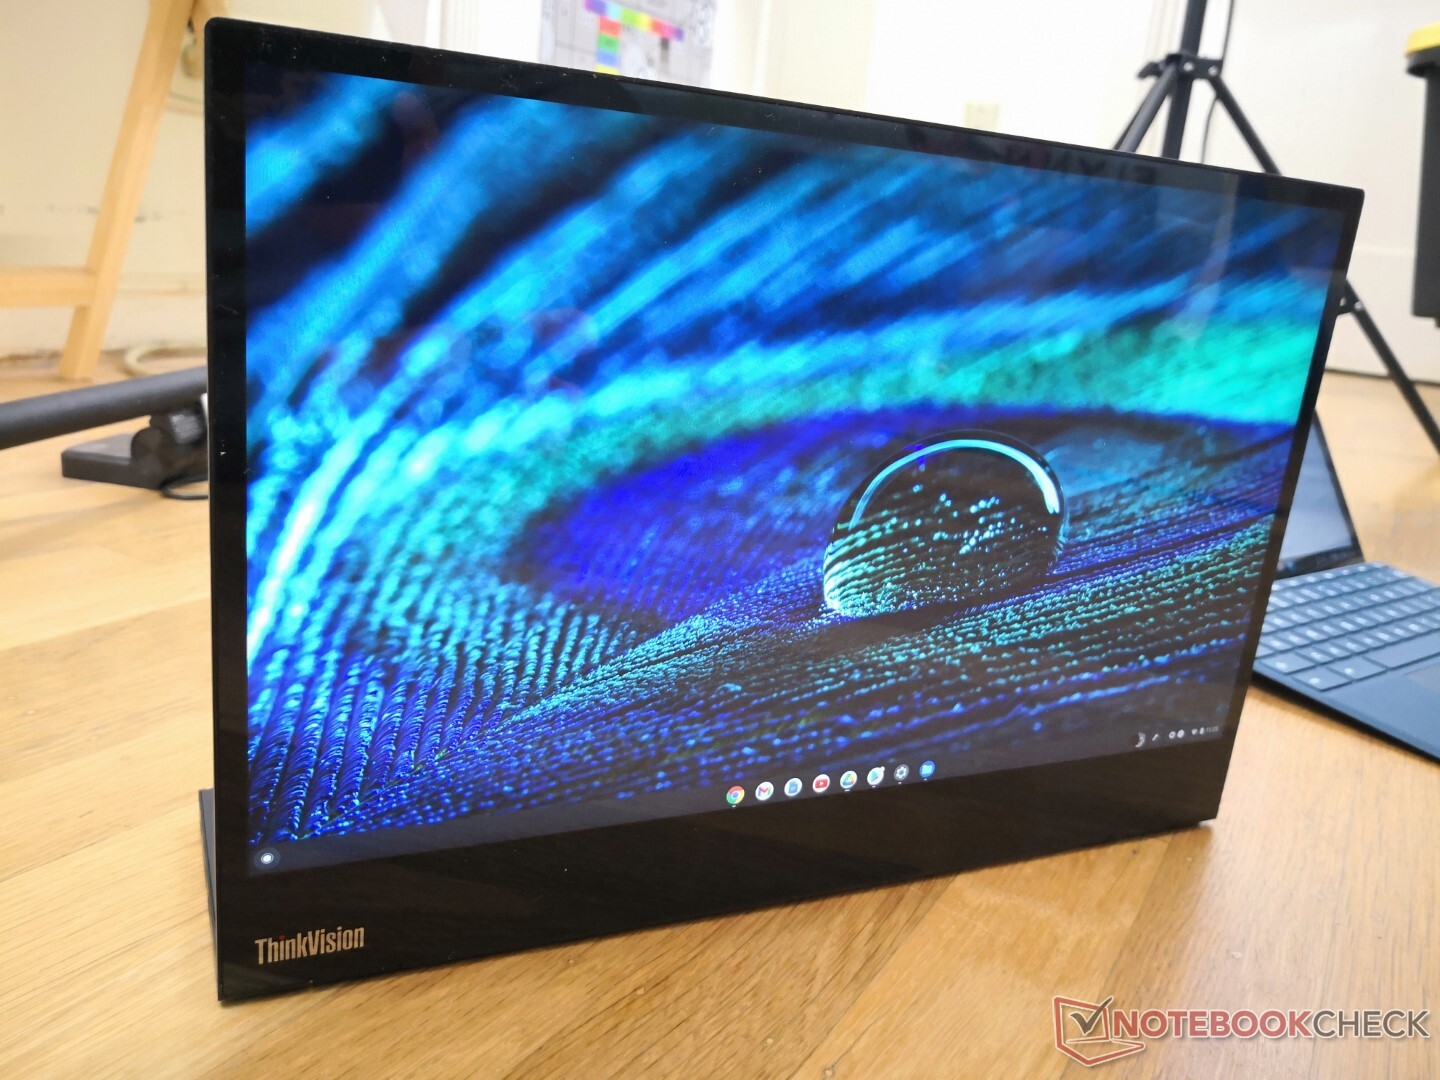 Lenovo ThinkVision M14t is one of the better portable monitors out